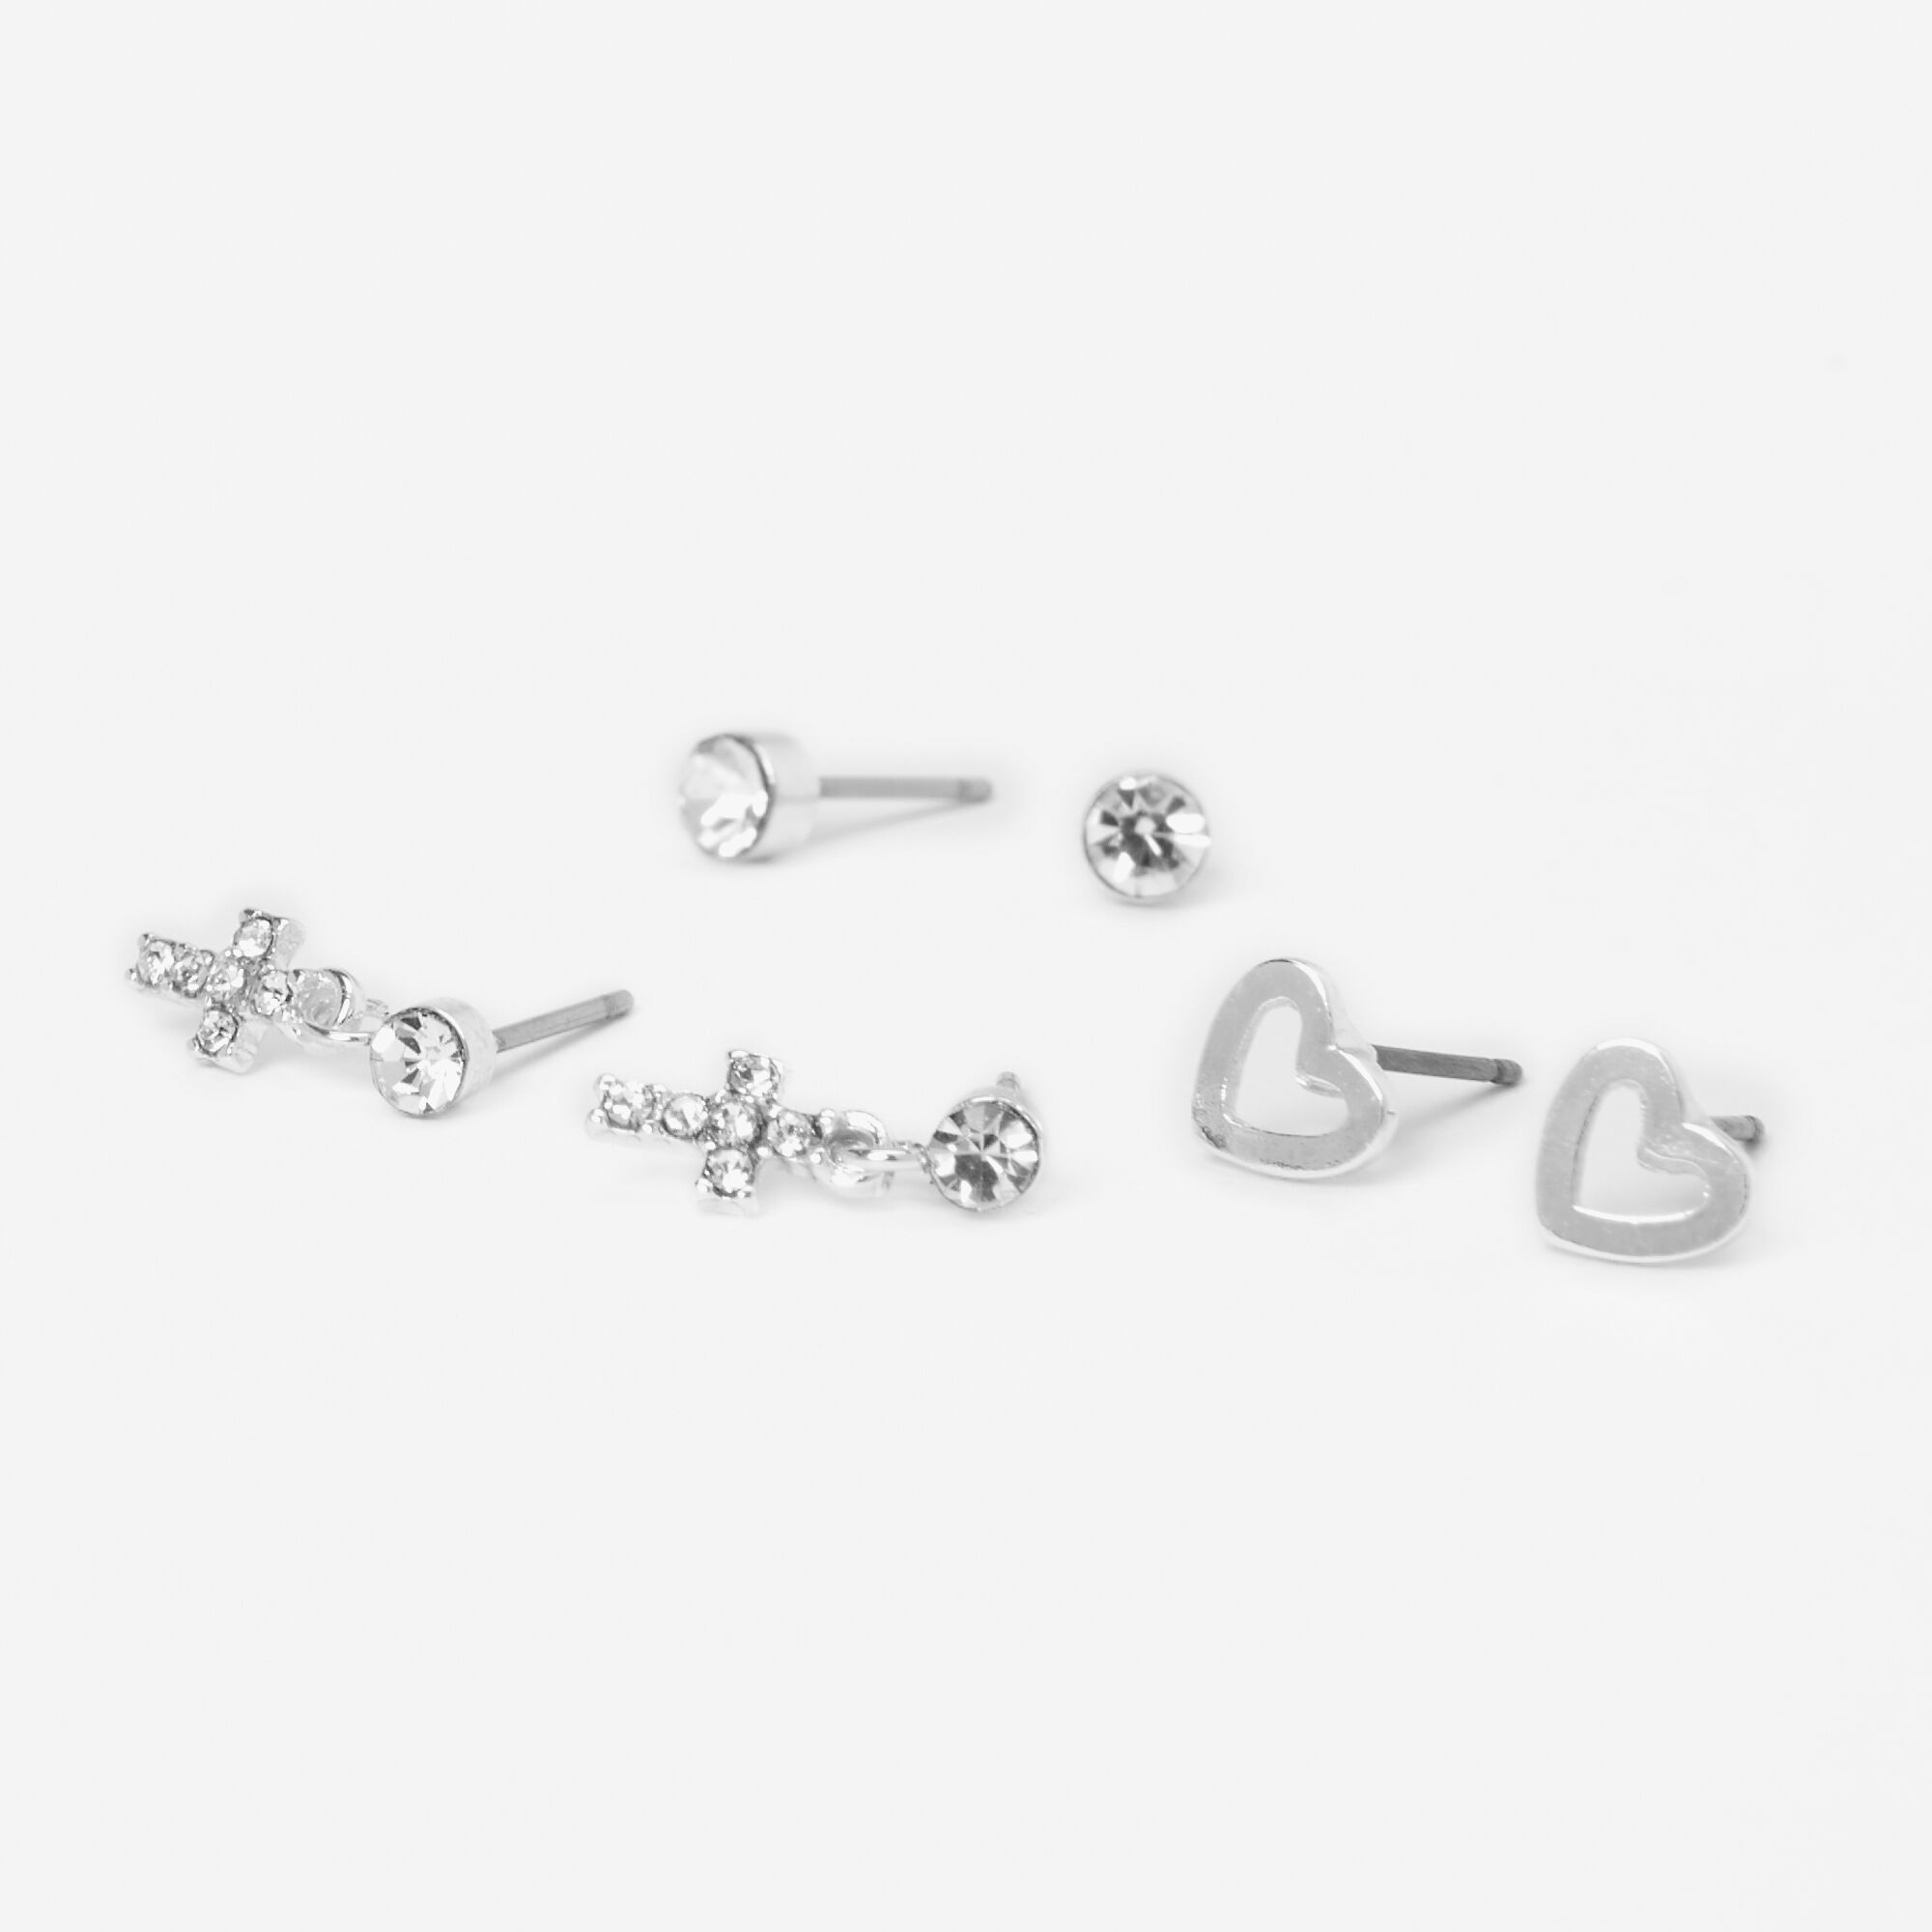 View Claires Tone Heart Crosses Stud Earrings 3 Pack Silver information